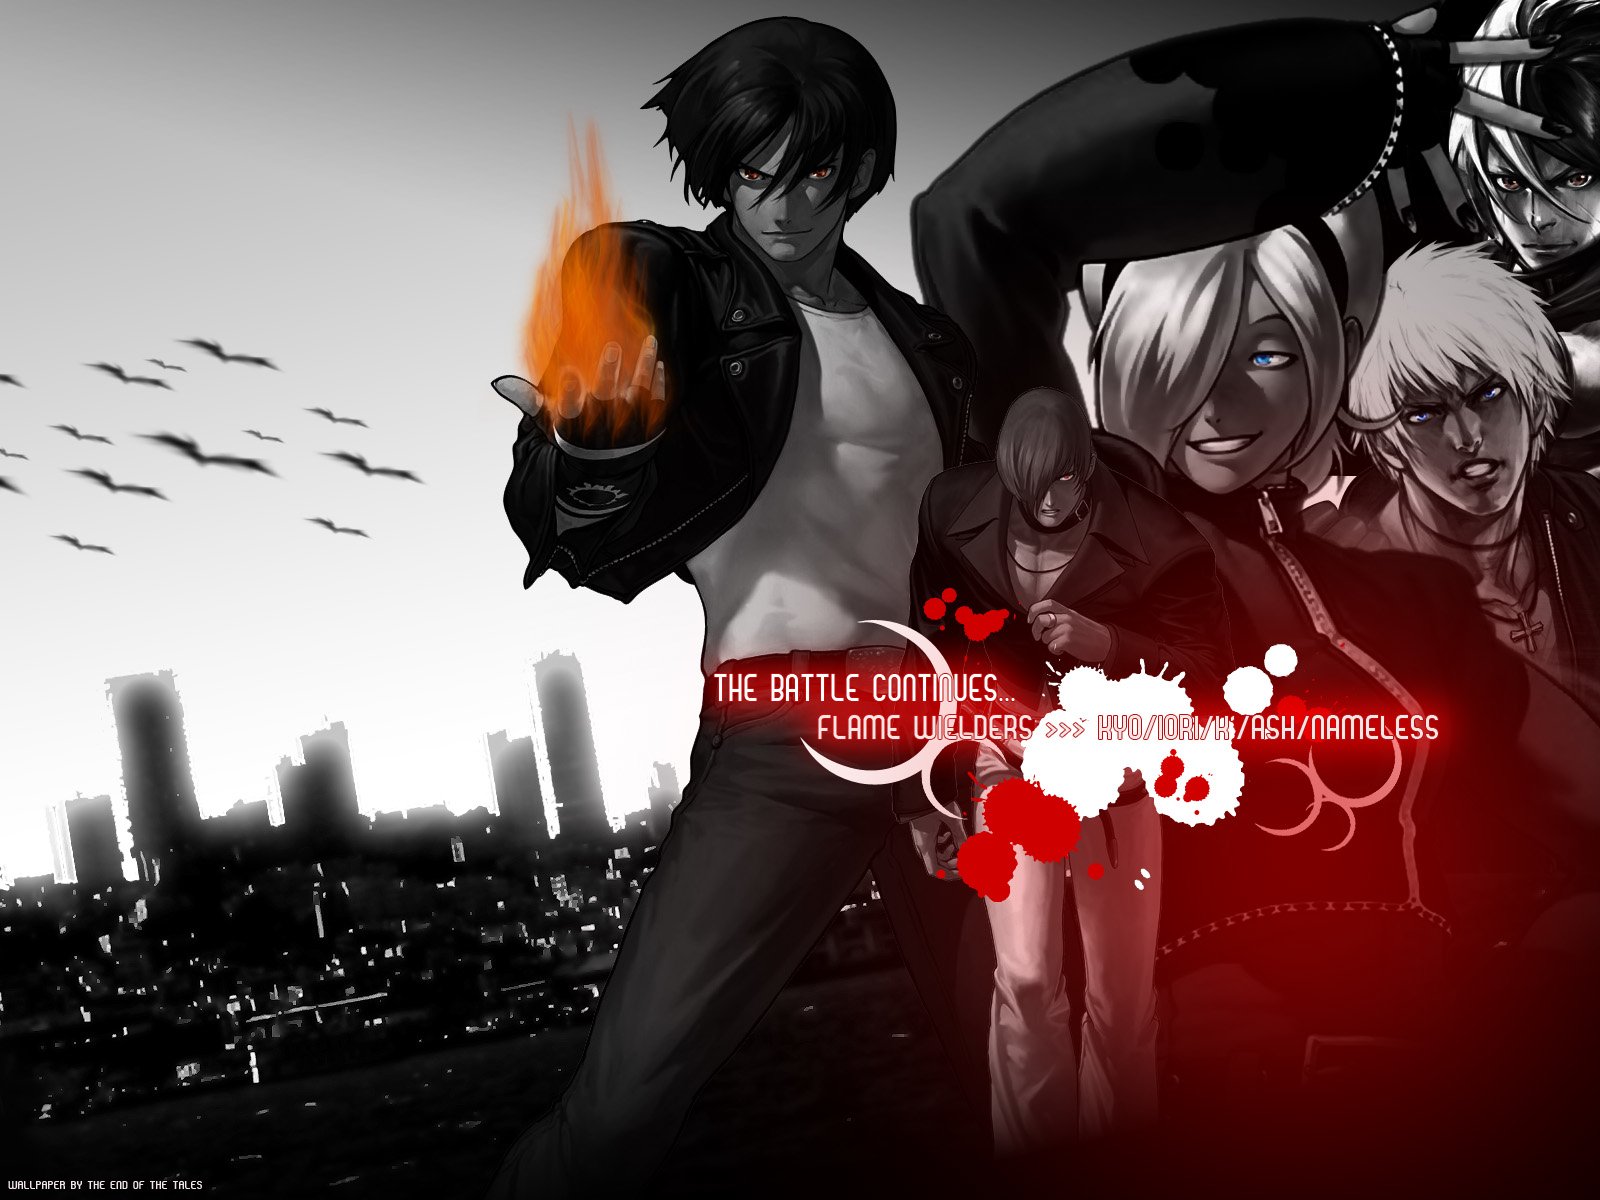 The King Of Fighters Flame Wielders Wallpaper And